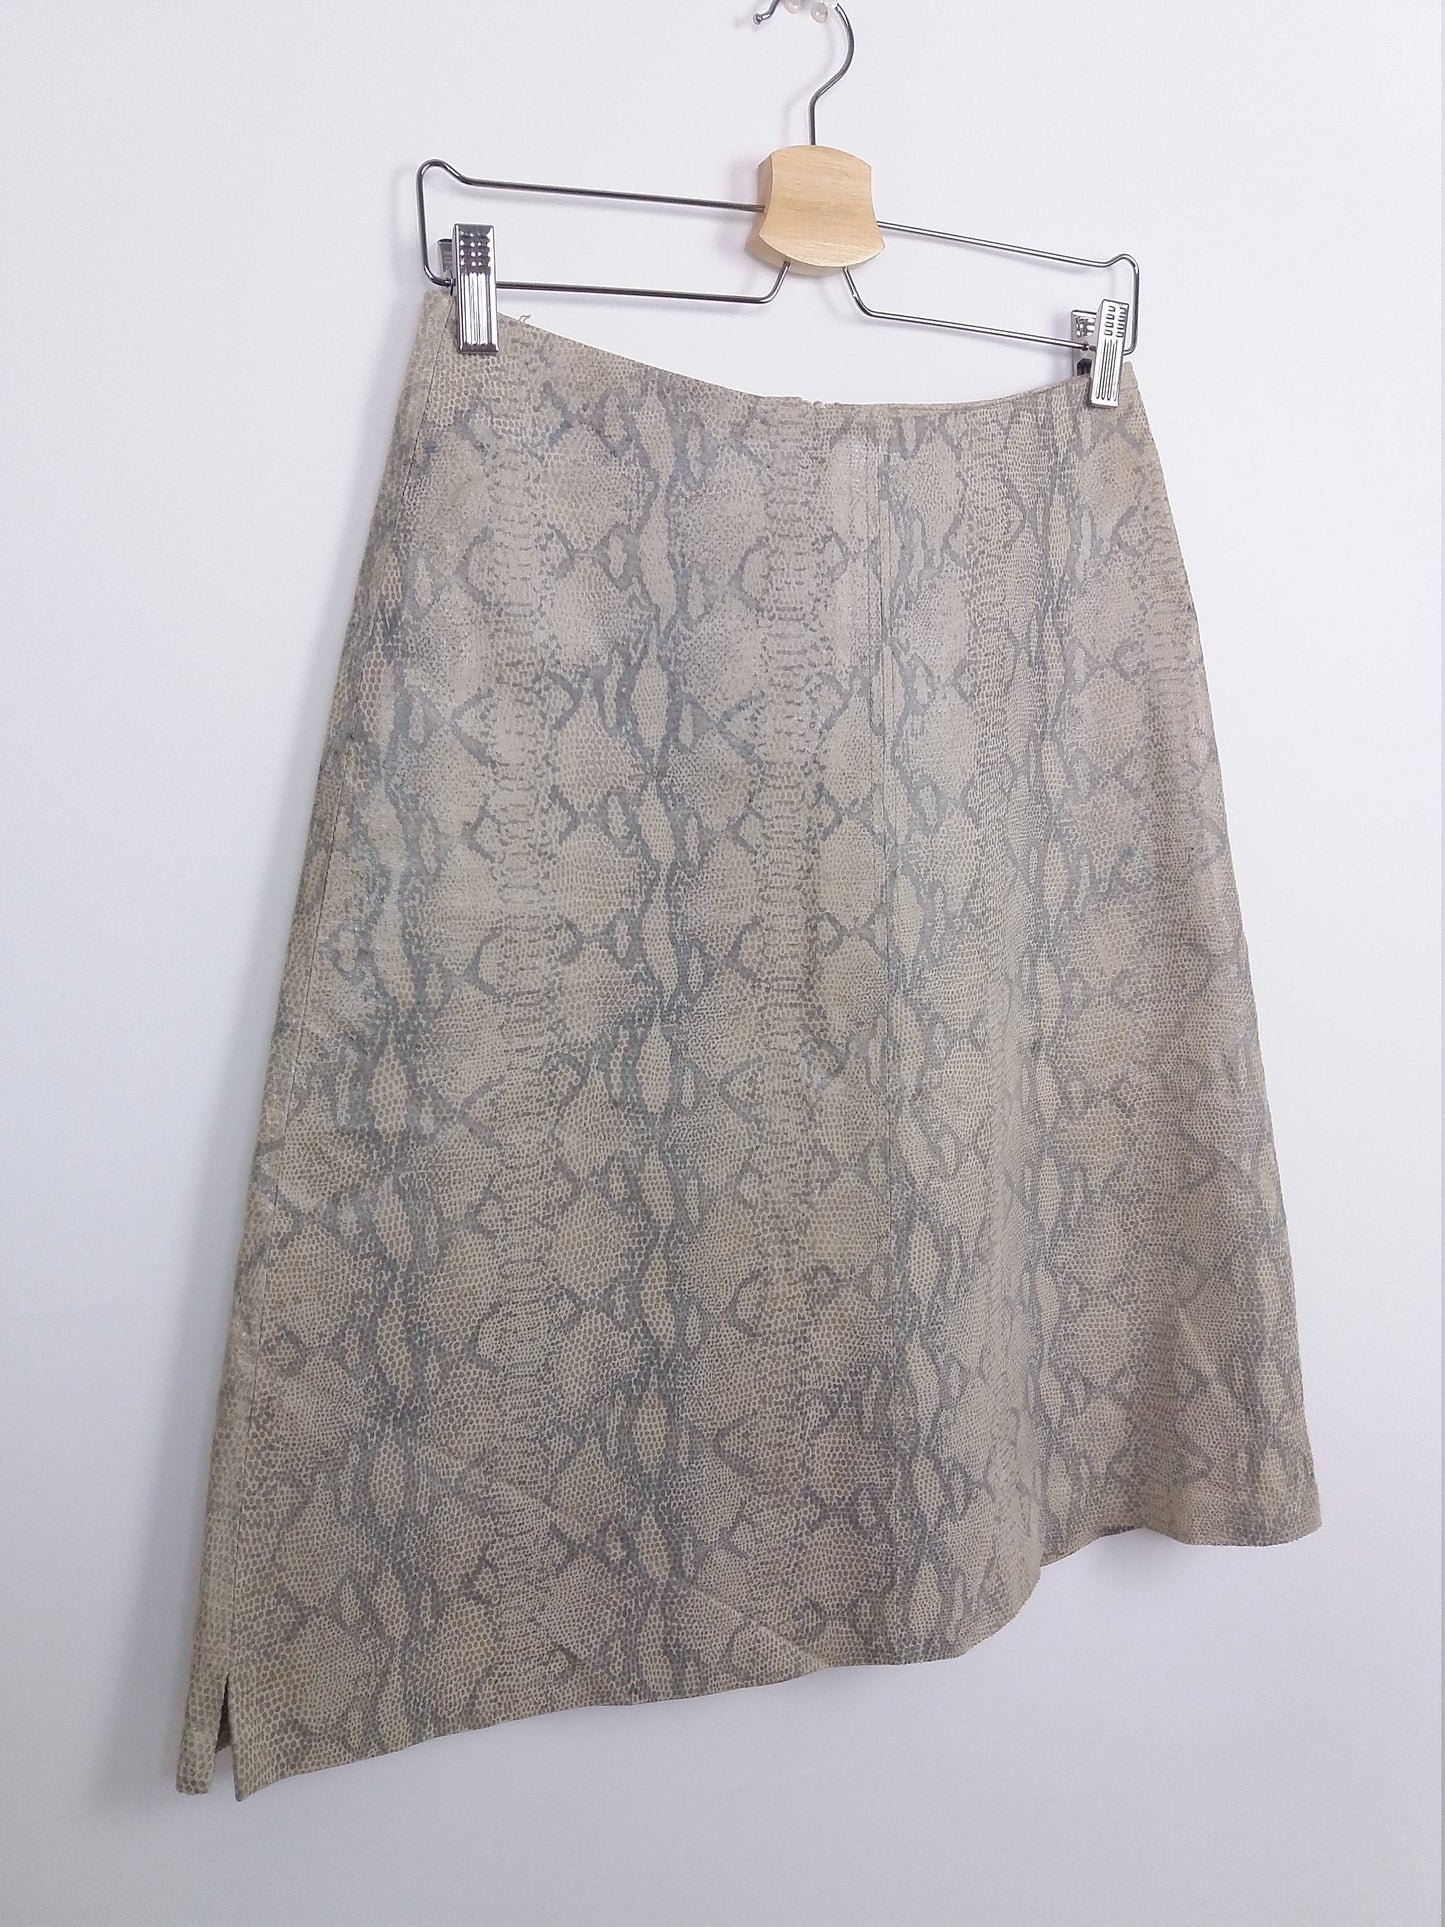 Deadstock H&M Genuine Leather A-line Skirt - size M